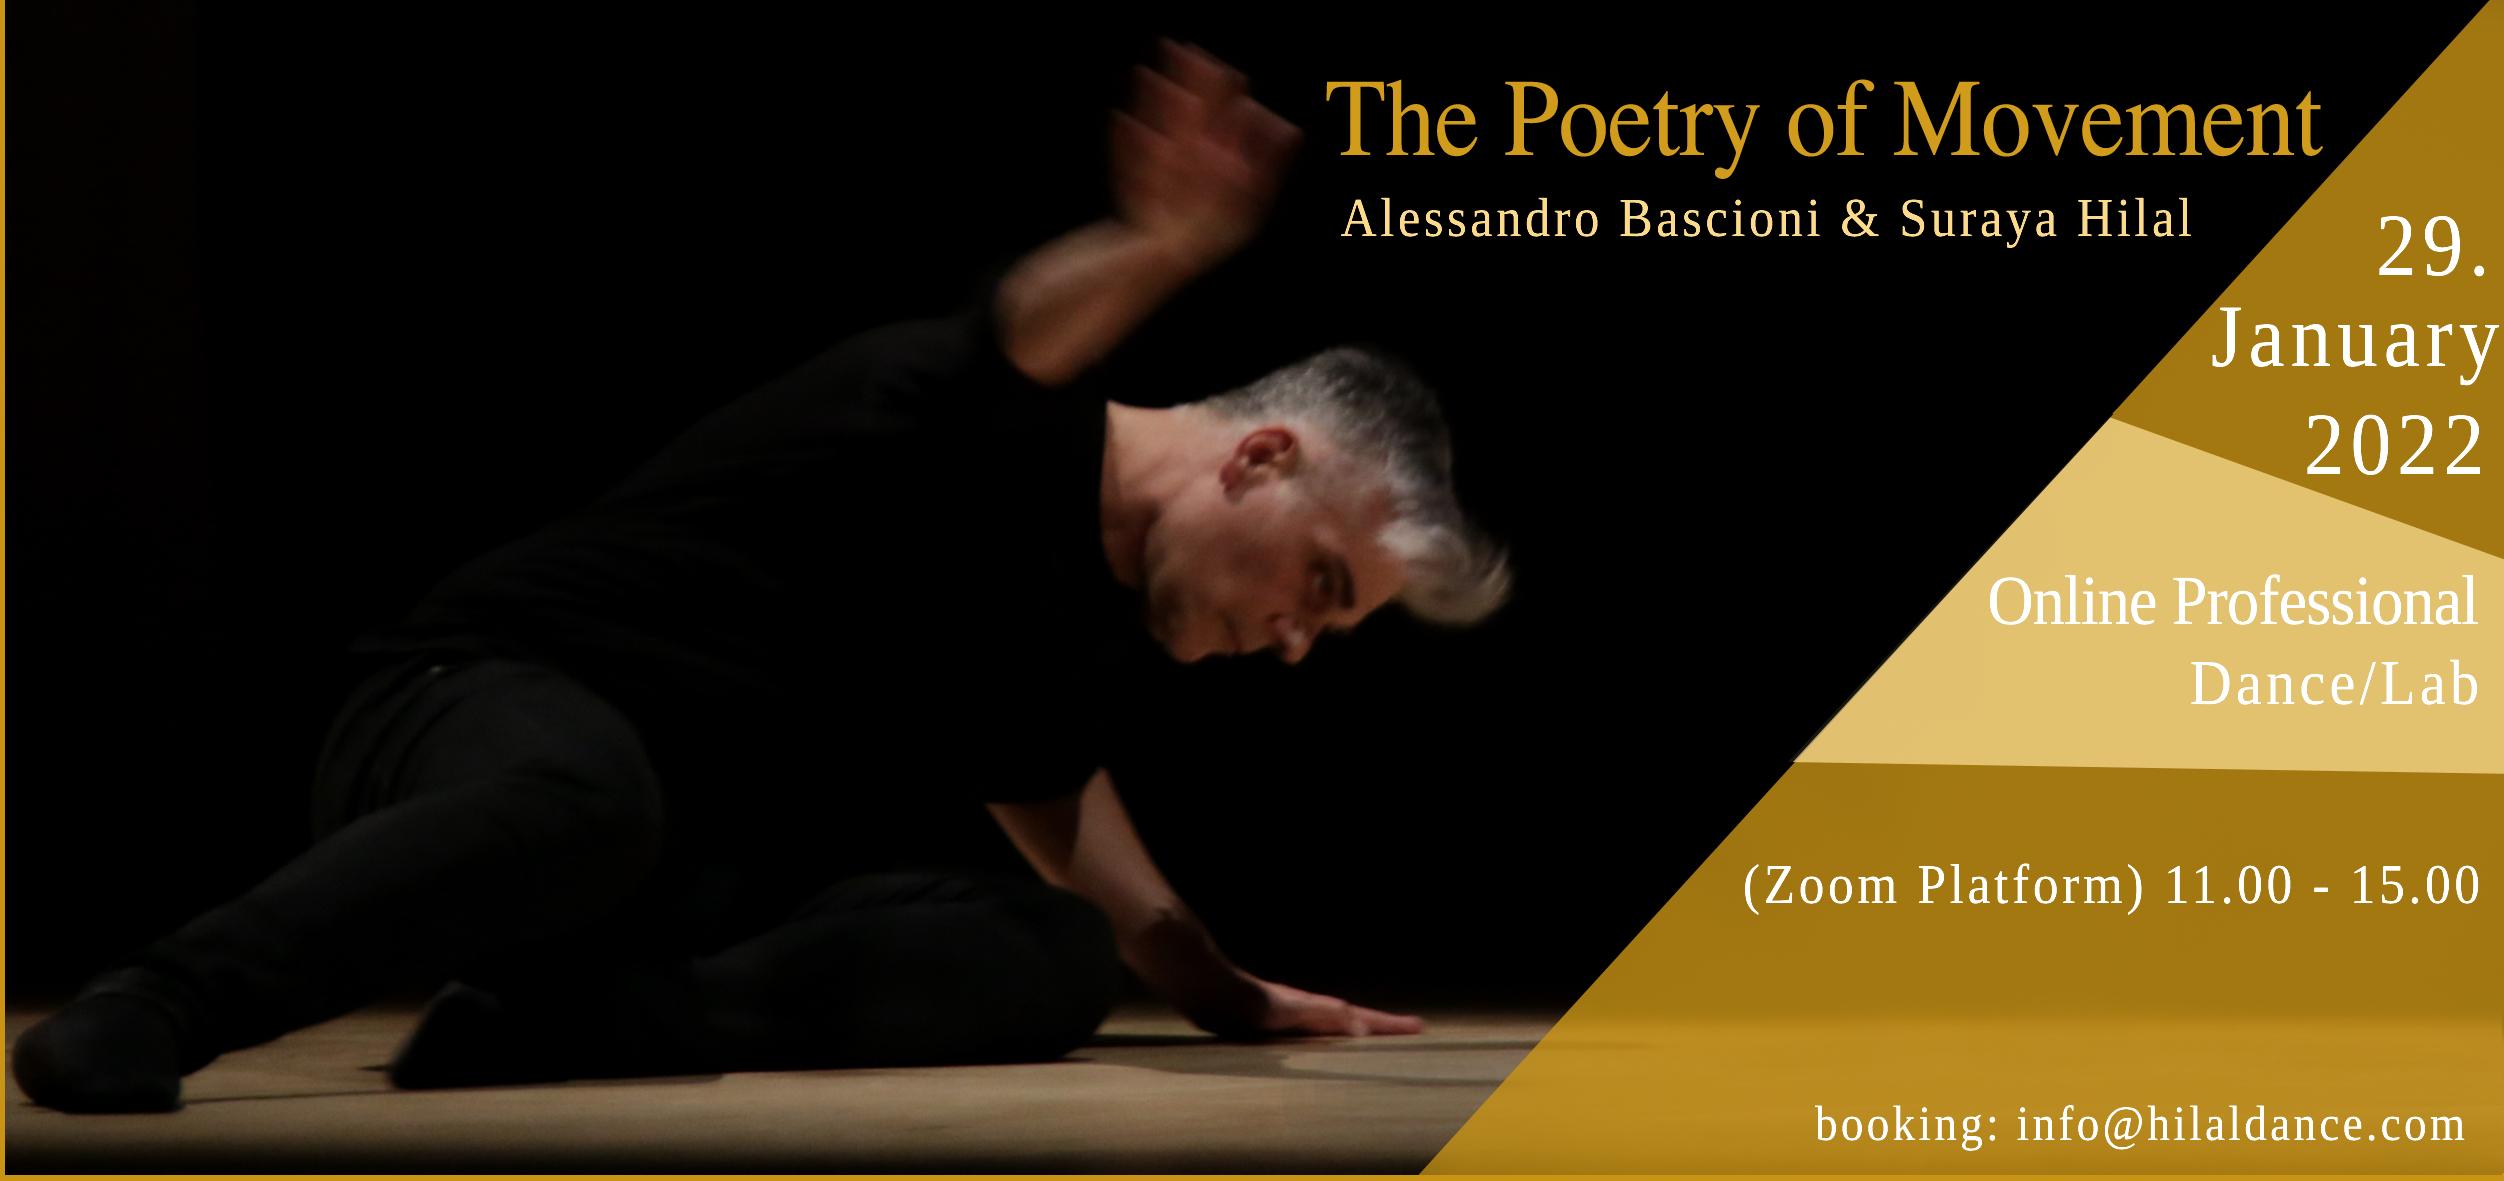 “The Poteri of Movement” Online Professional Dance/Lab 29 January 2022 with A. Bascioni & S. Hilal